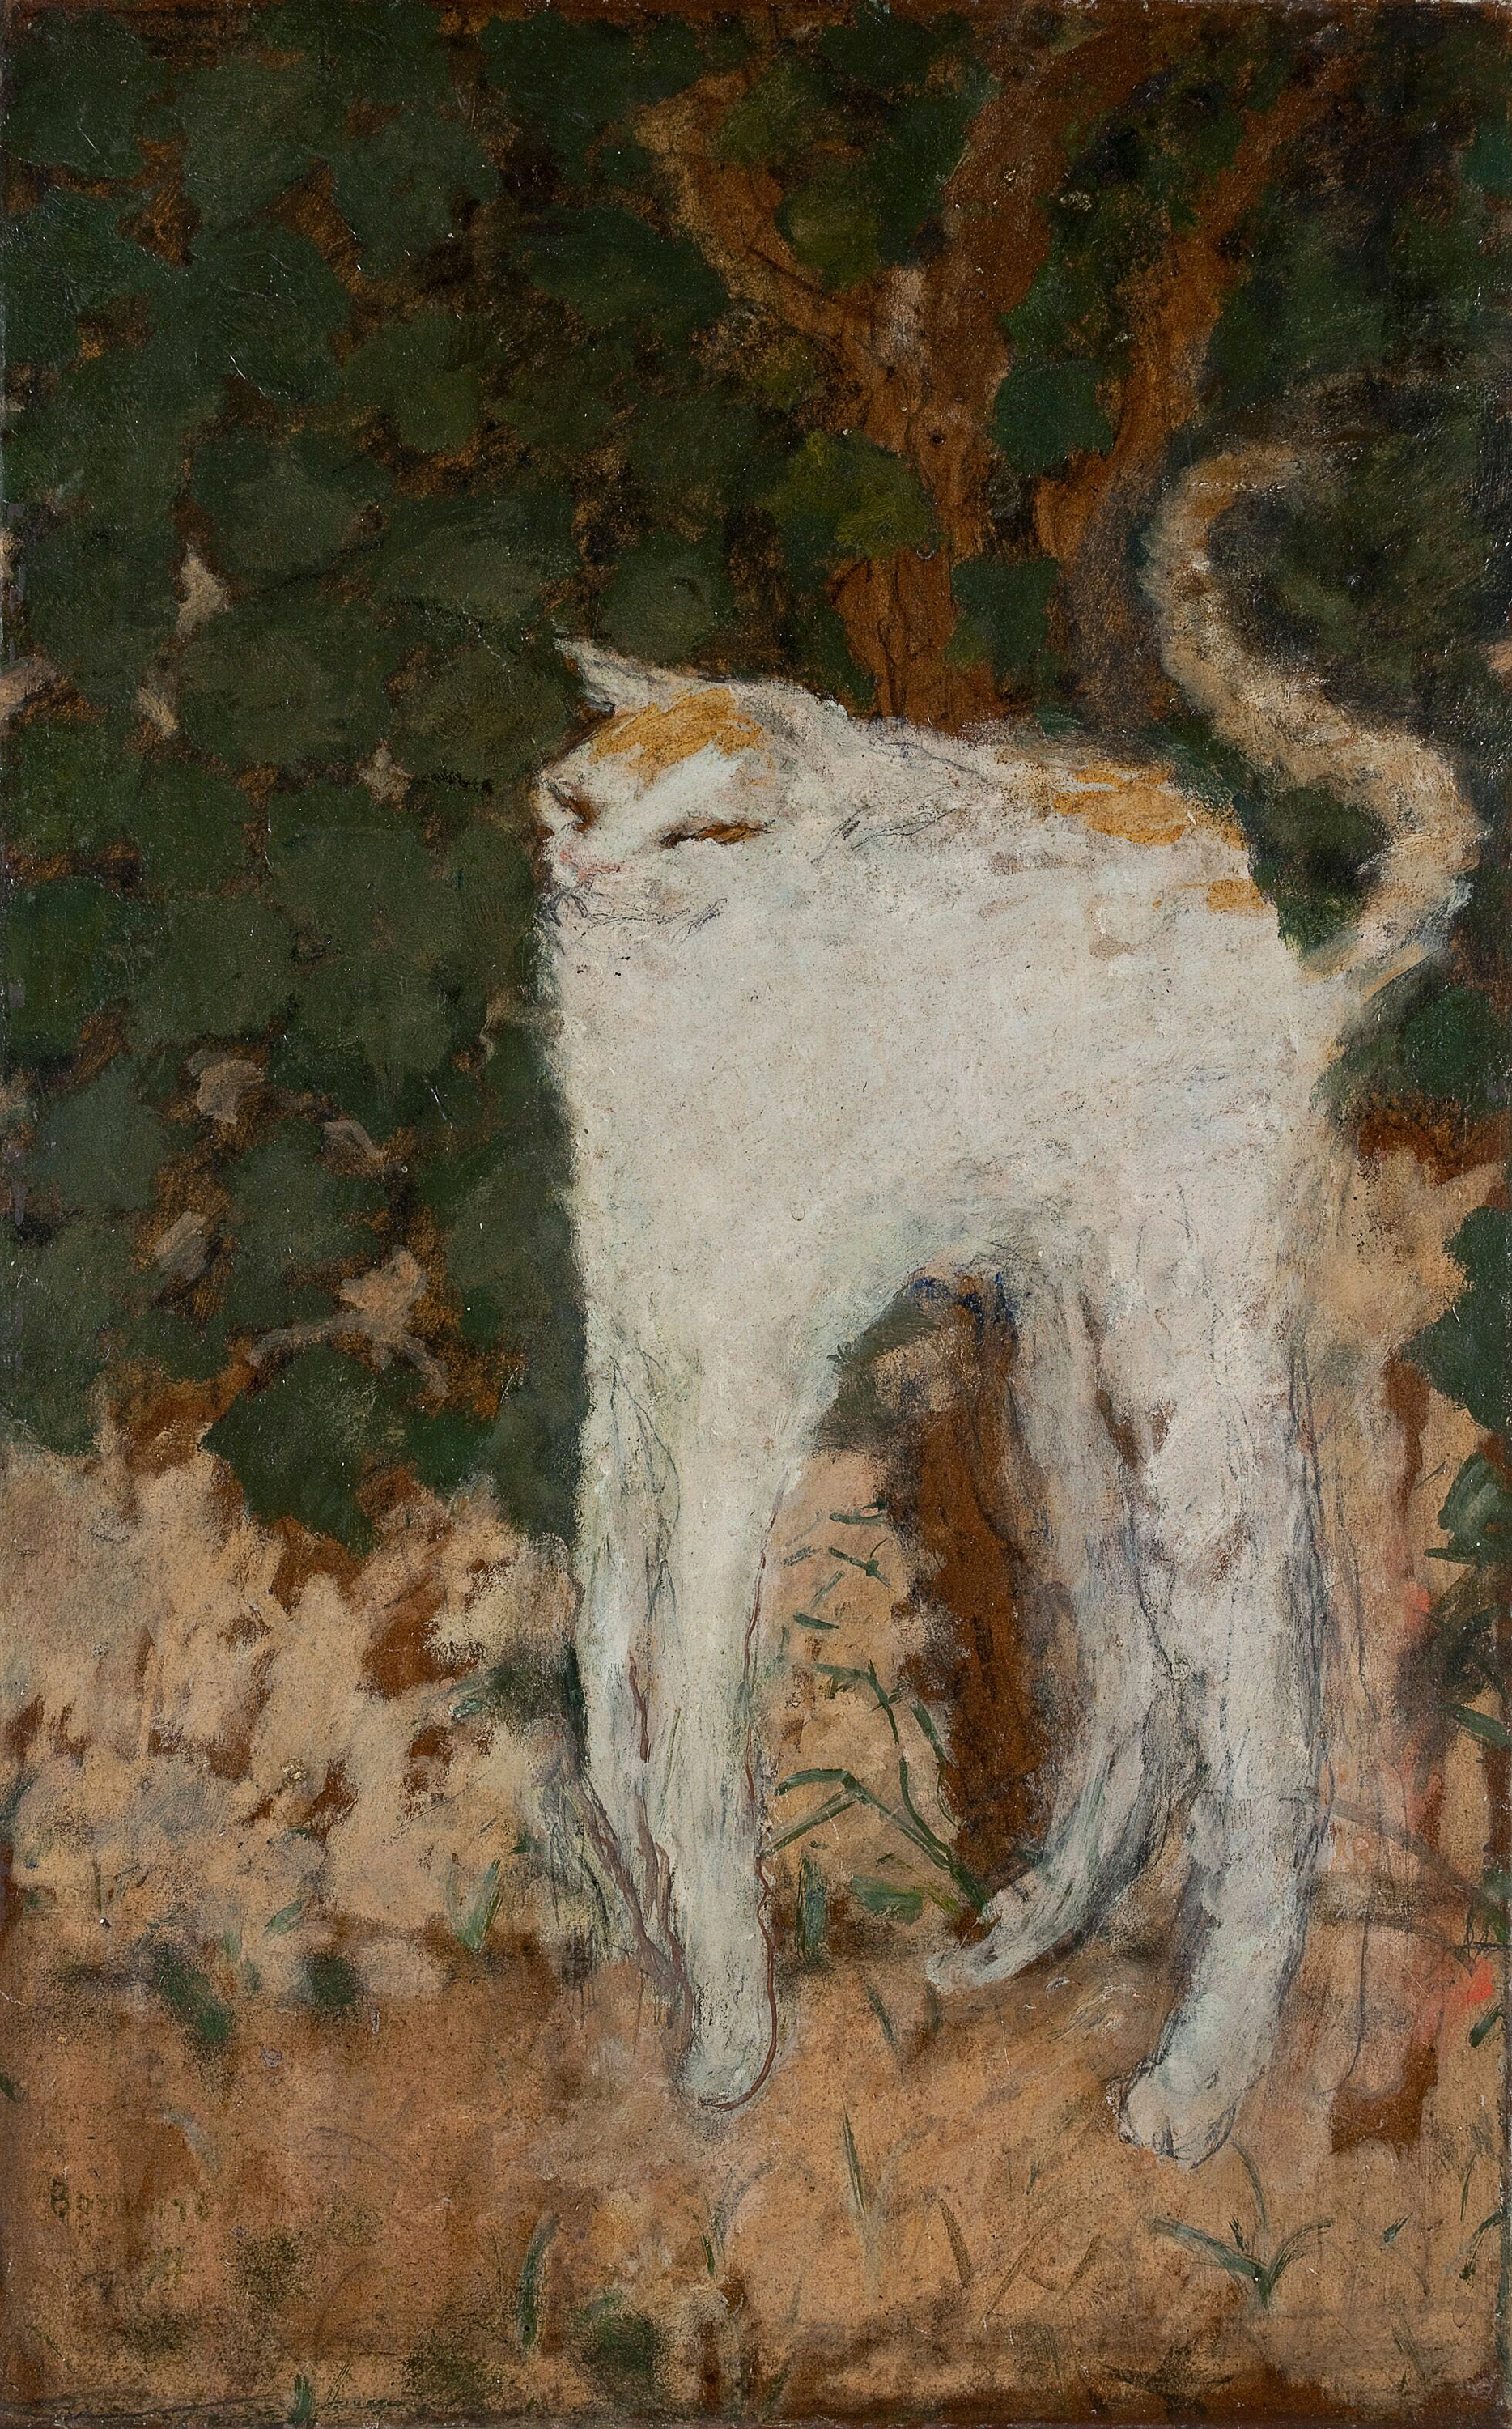 An oil painting of a white cat with very, very long legs, in a forest setting.